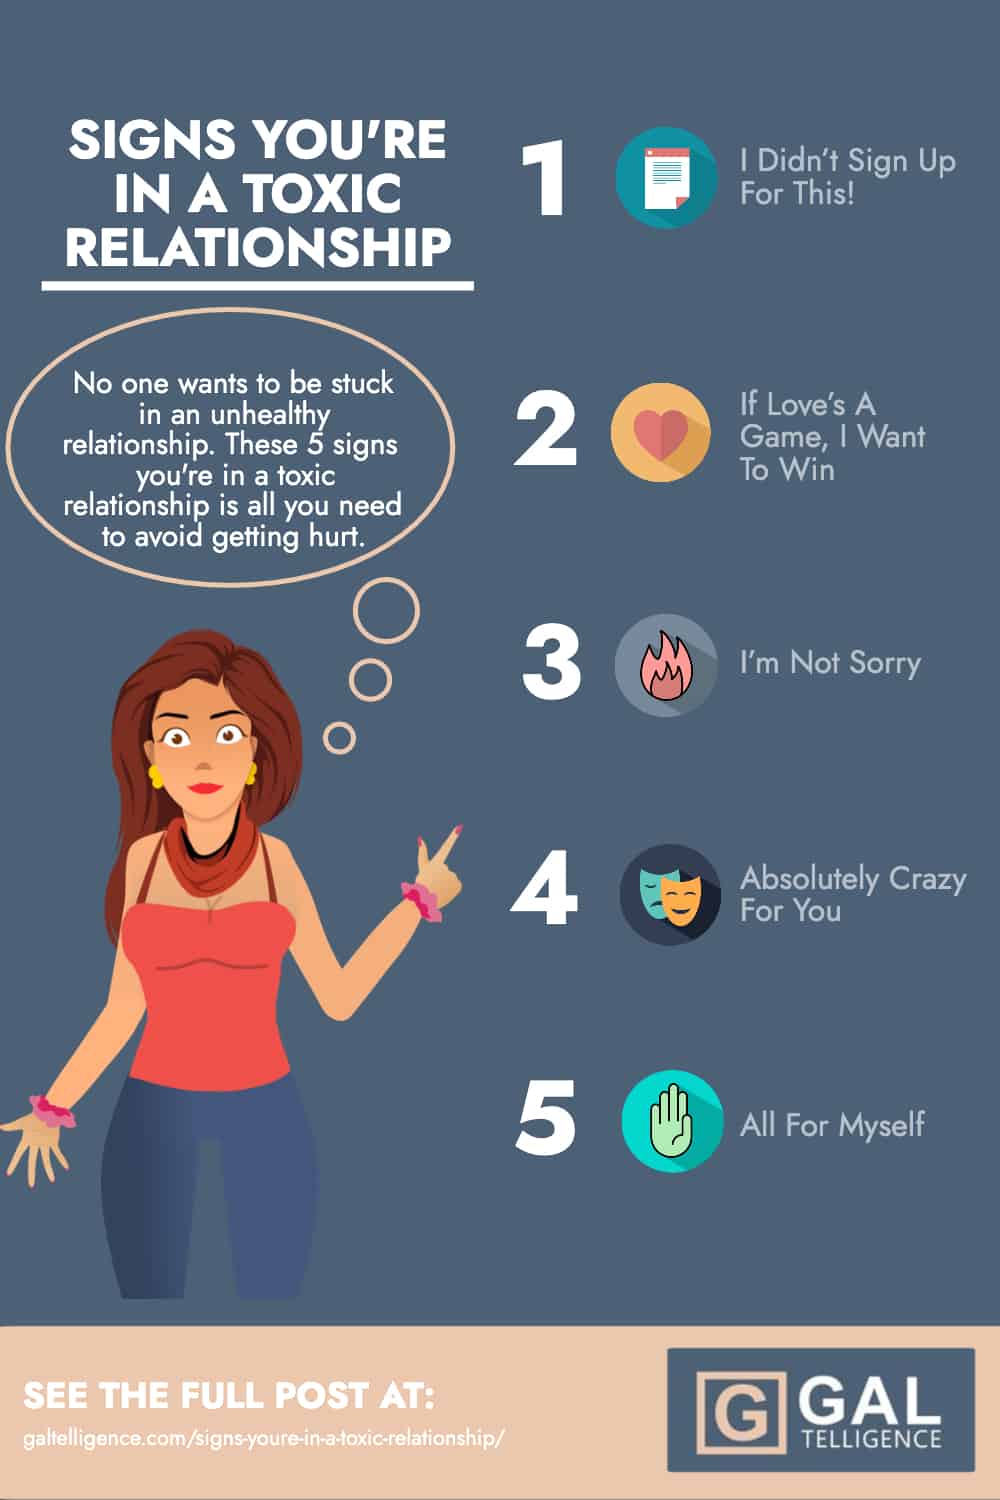 signs you're in a toxic relationship - infographic